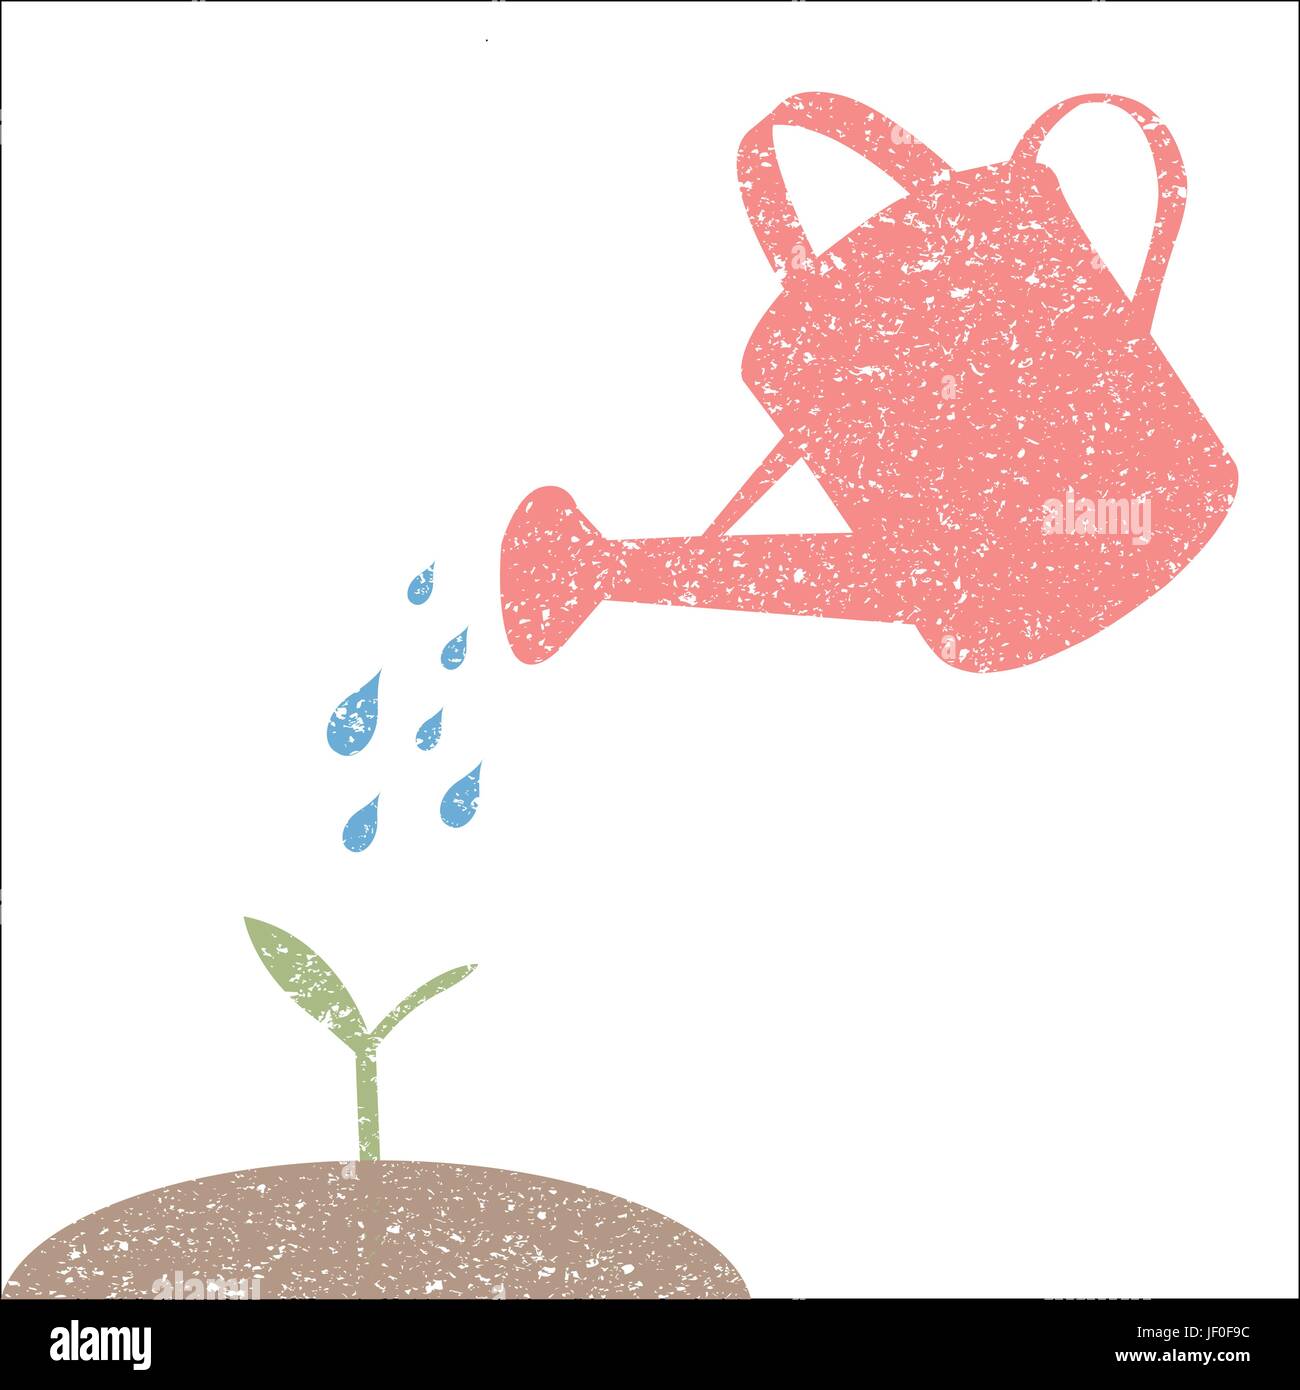 leaf, object, isolated, plant, cultivate, implant, ground, soil, earth, humus, Stock Vector